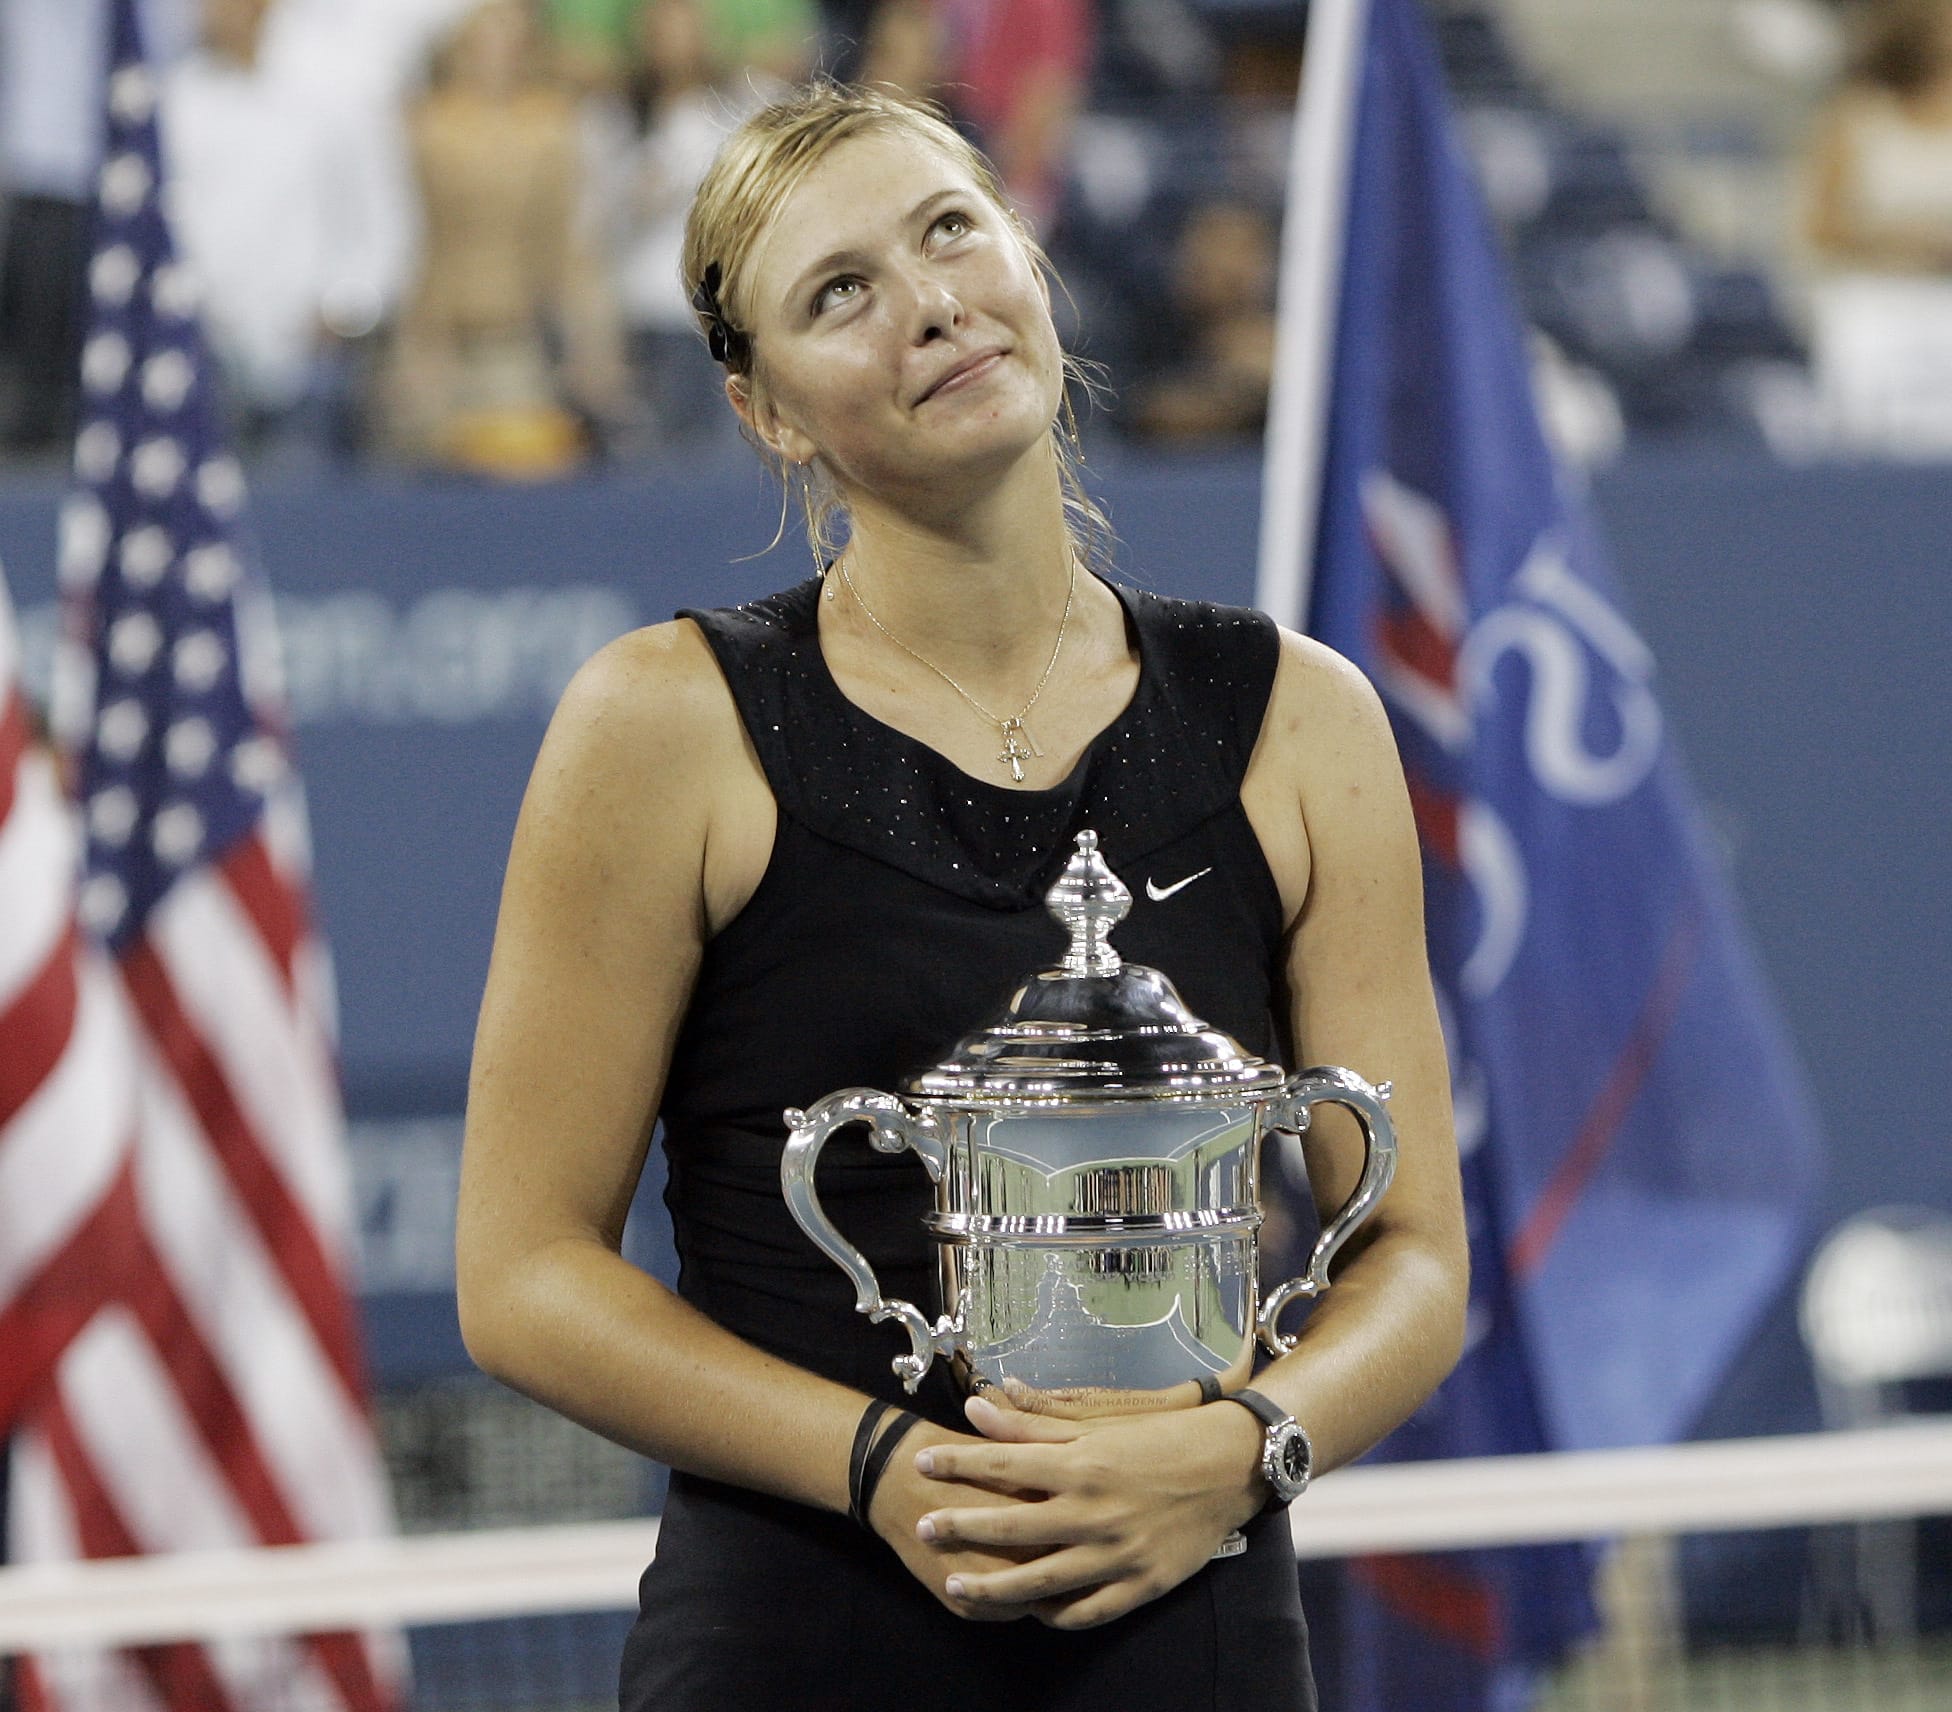 Maria Sharapova looks up to the crowd after winning the 2006 U.S. Open women's singles championship. Sharapova is retiring from professional tennis at the age of 32 after five Grand Slam titles. She has been dealing with shoulder problems for years.